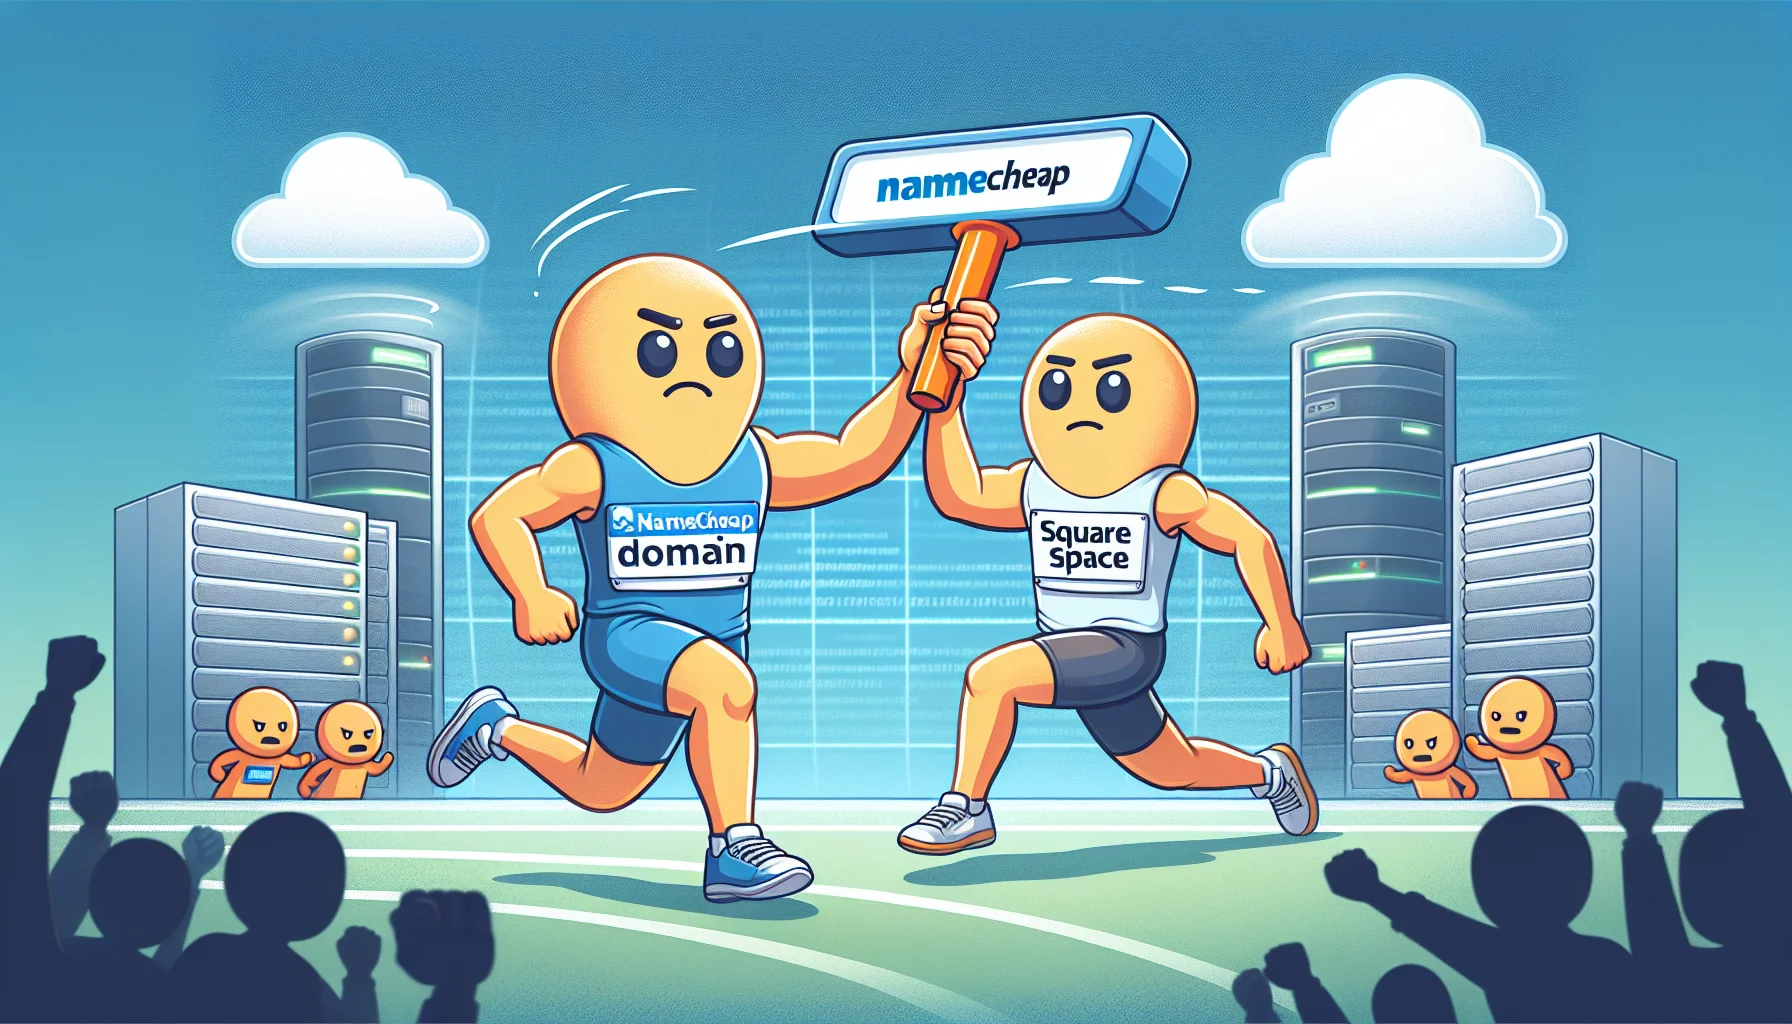 Create a comedic and enticing image for web hosting. It features two cartoon characters, personified as domains. The character depicting Namecheap domain, a male character of Middle-Eastern descent, is passing a symbolic baton to the Squarespace domain, represented by a female character of Hispanic descent. They are running in a relay race, highlighting the transition. The setting has a digital backdrop, symbols of web hosting floating around (server towers, cloud symbols), and an audience of small icon spectators cheering. The interaction between the two characters indicates a friendly competition.